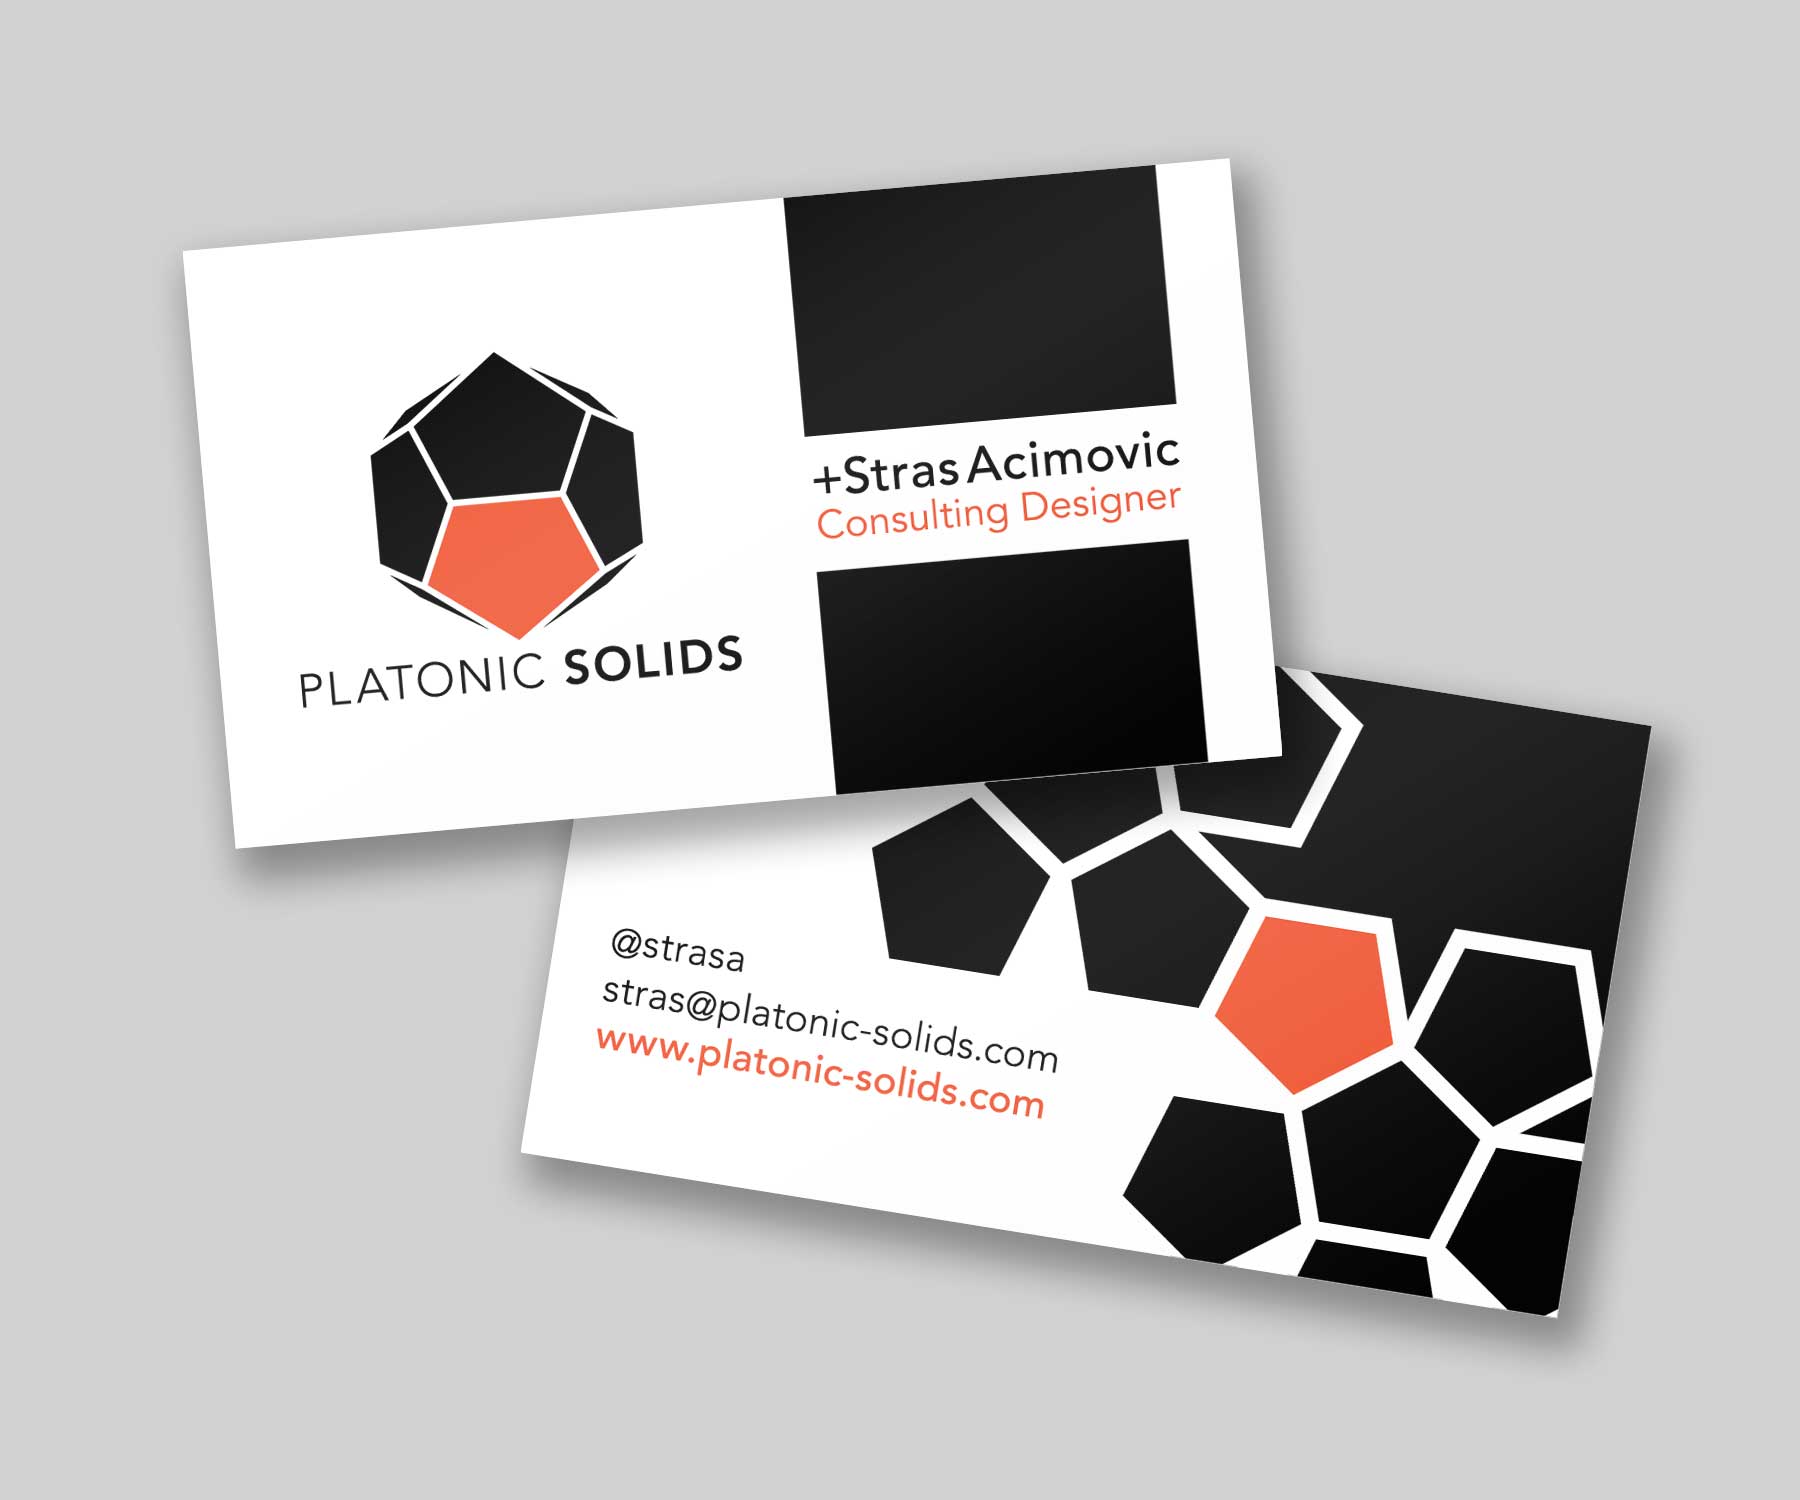 A business card in horizontal layout, with front and back designs